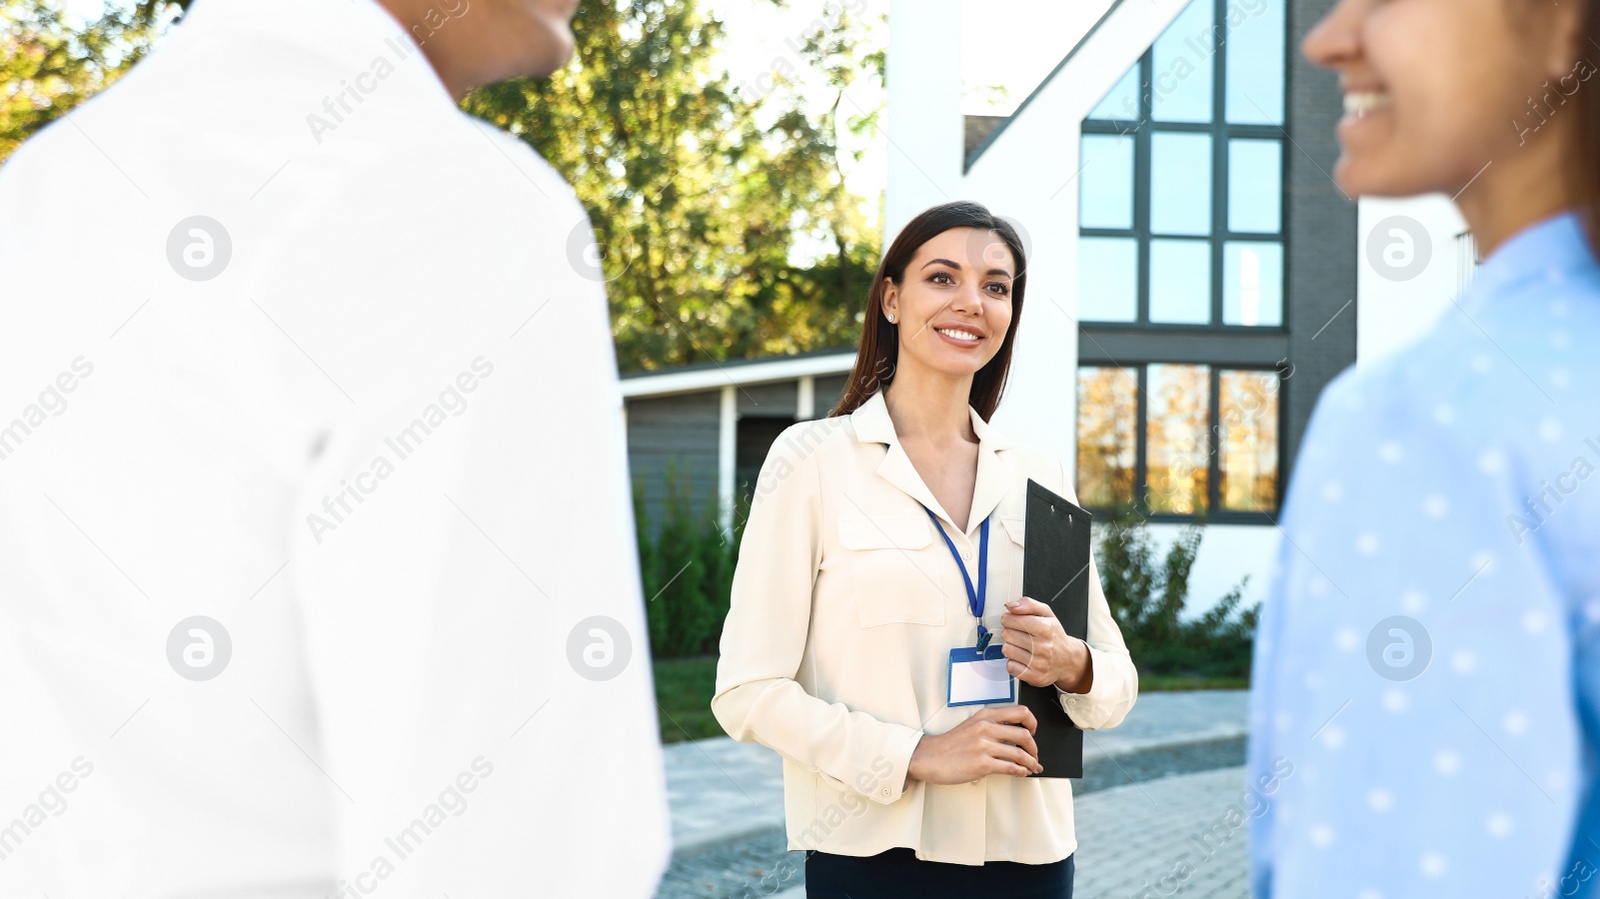 Photo of Real estate agent showing house to young couple outdoors